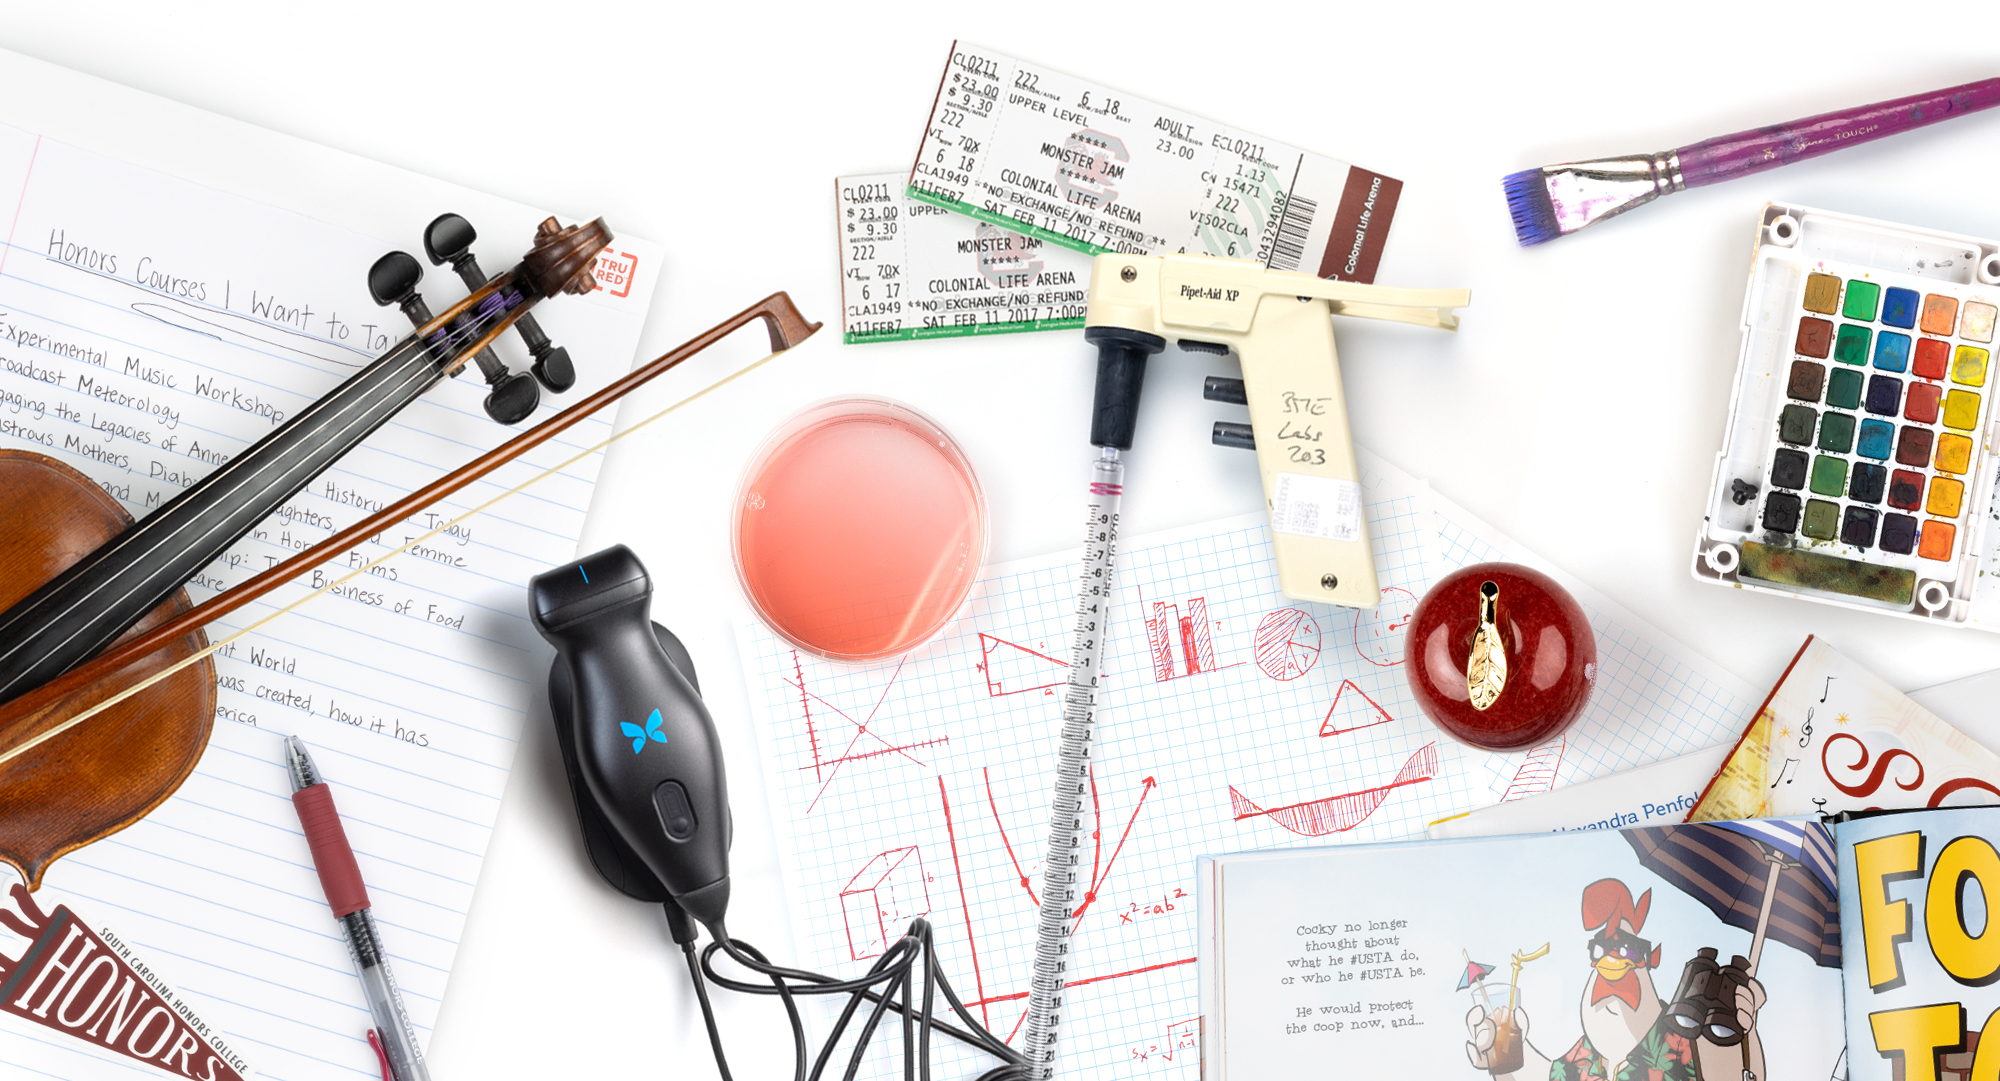 A collection of items, including a violin, movie tickets, writing utensils, and drawings on graph paper, that represent the colleges at the university.